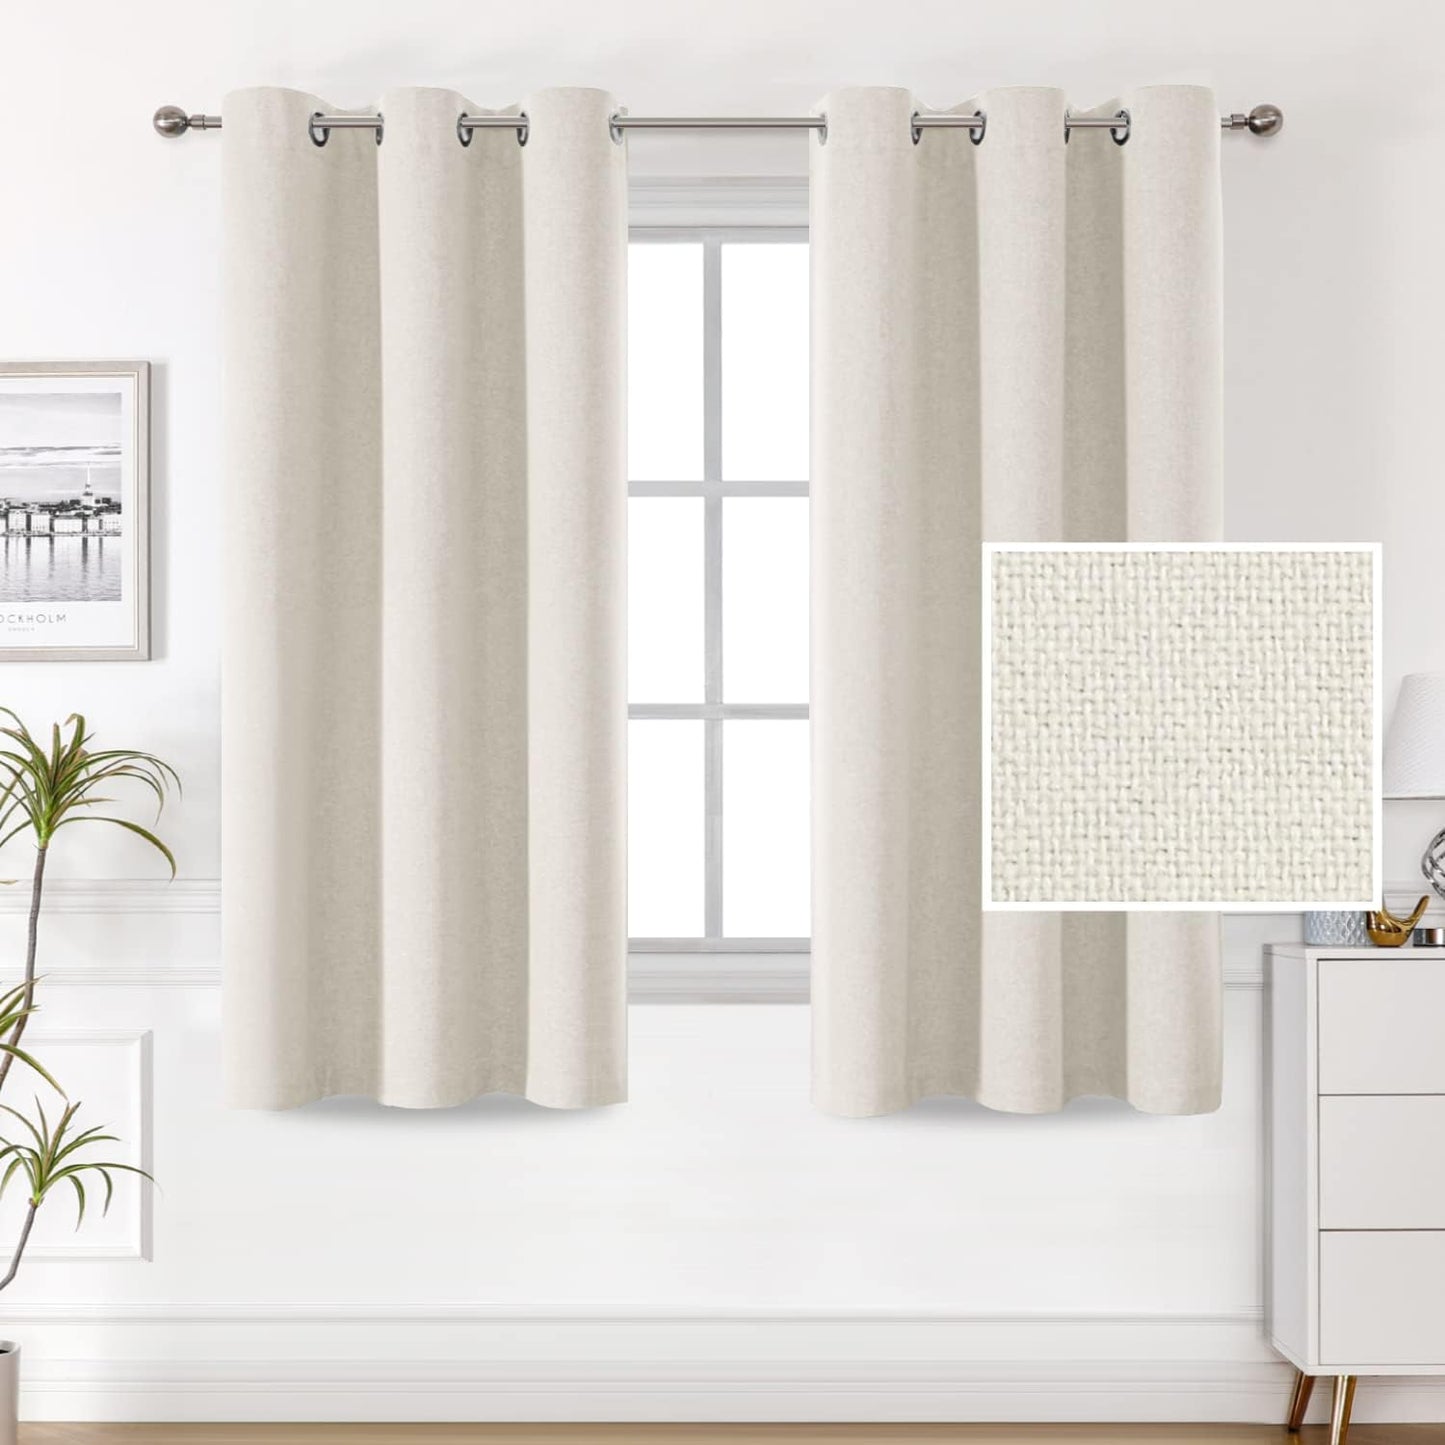 H.VERSAILTEX 100% Blackout Linen Look Curtains Thermal Insulated Curtains for Living Room Textured Burlap Drapes for Bedroom Grommet Linen Noise Blocking Curtains 42 X 84 Inch, 2 Panels - Sage  H.VERSAILTEX Ivory 42"W X 63"L 